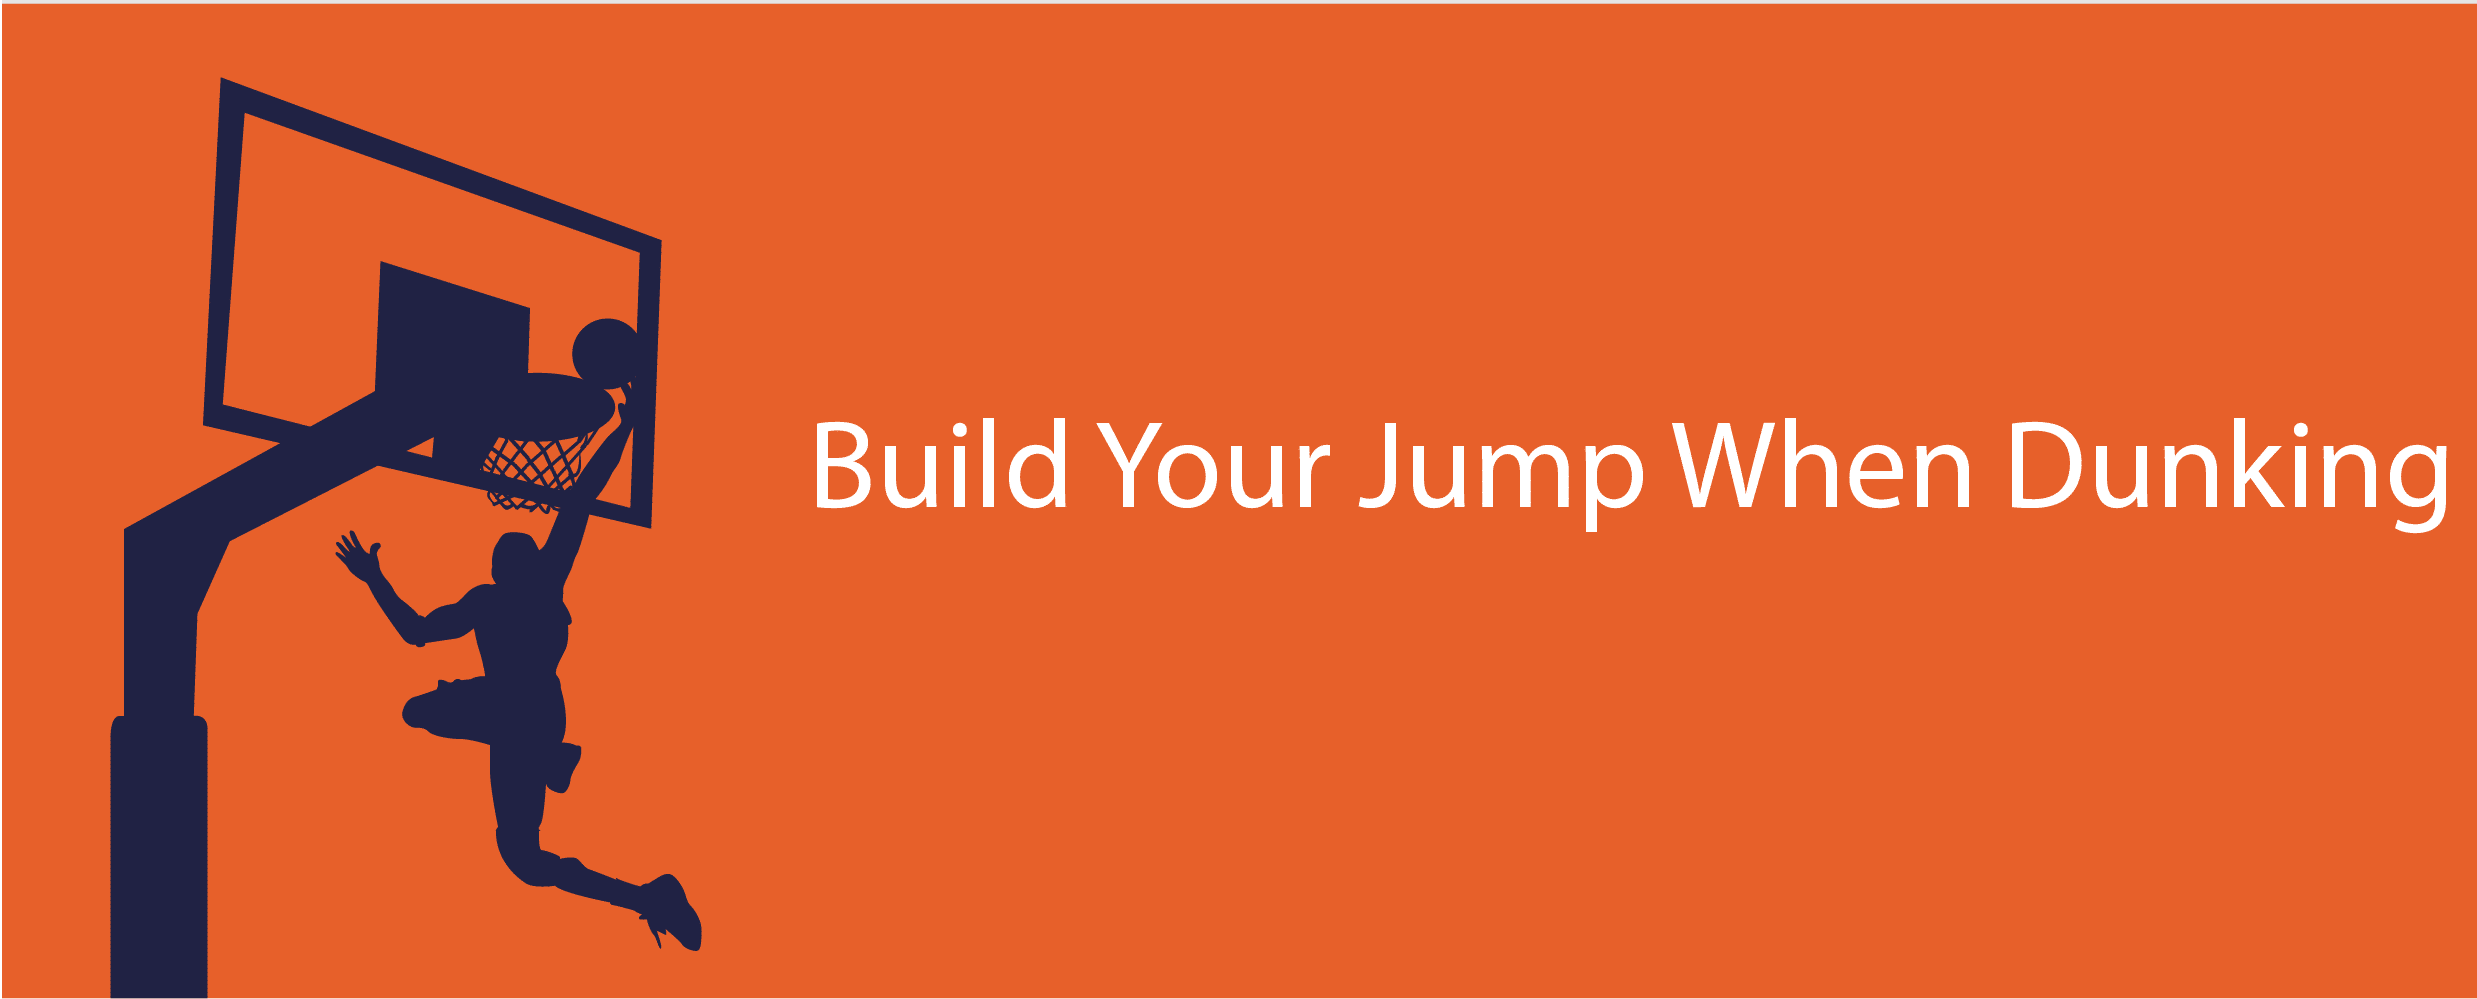 Build your Jump when dunking is an important factor